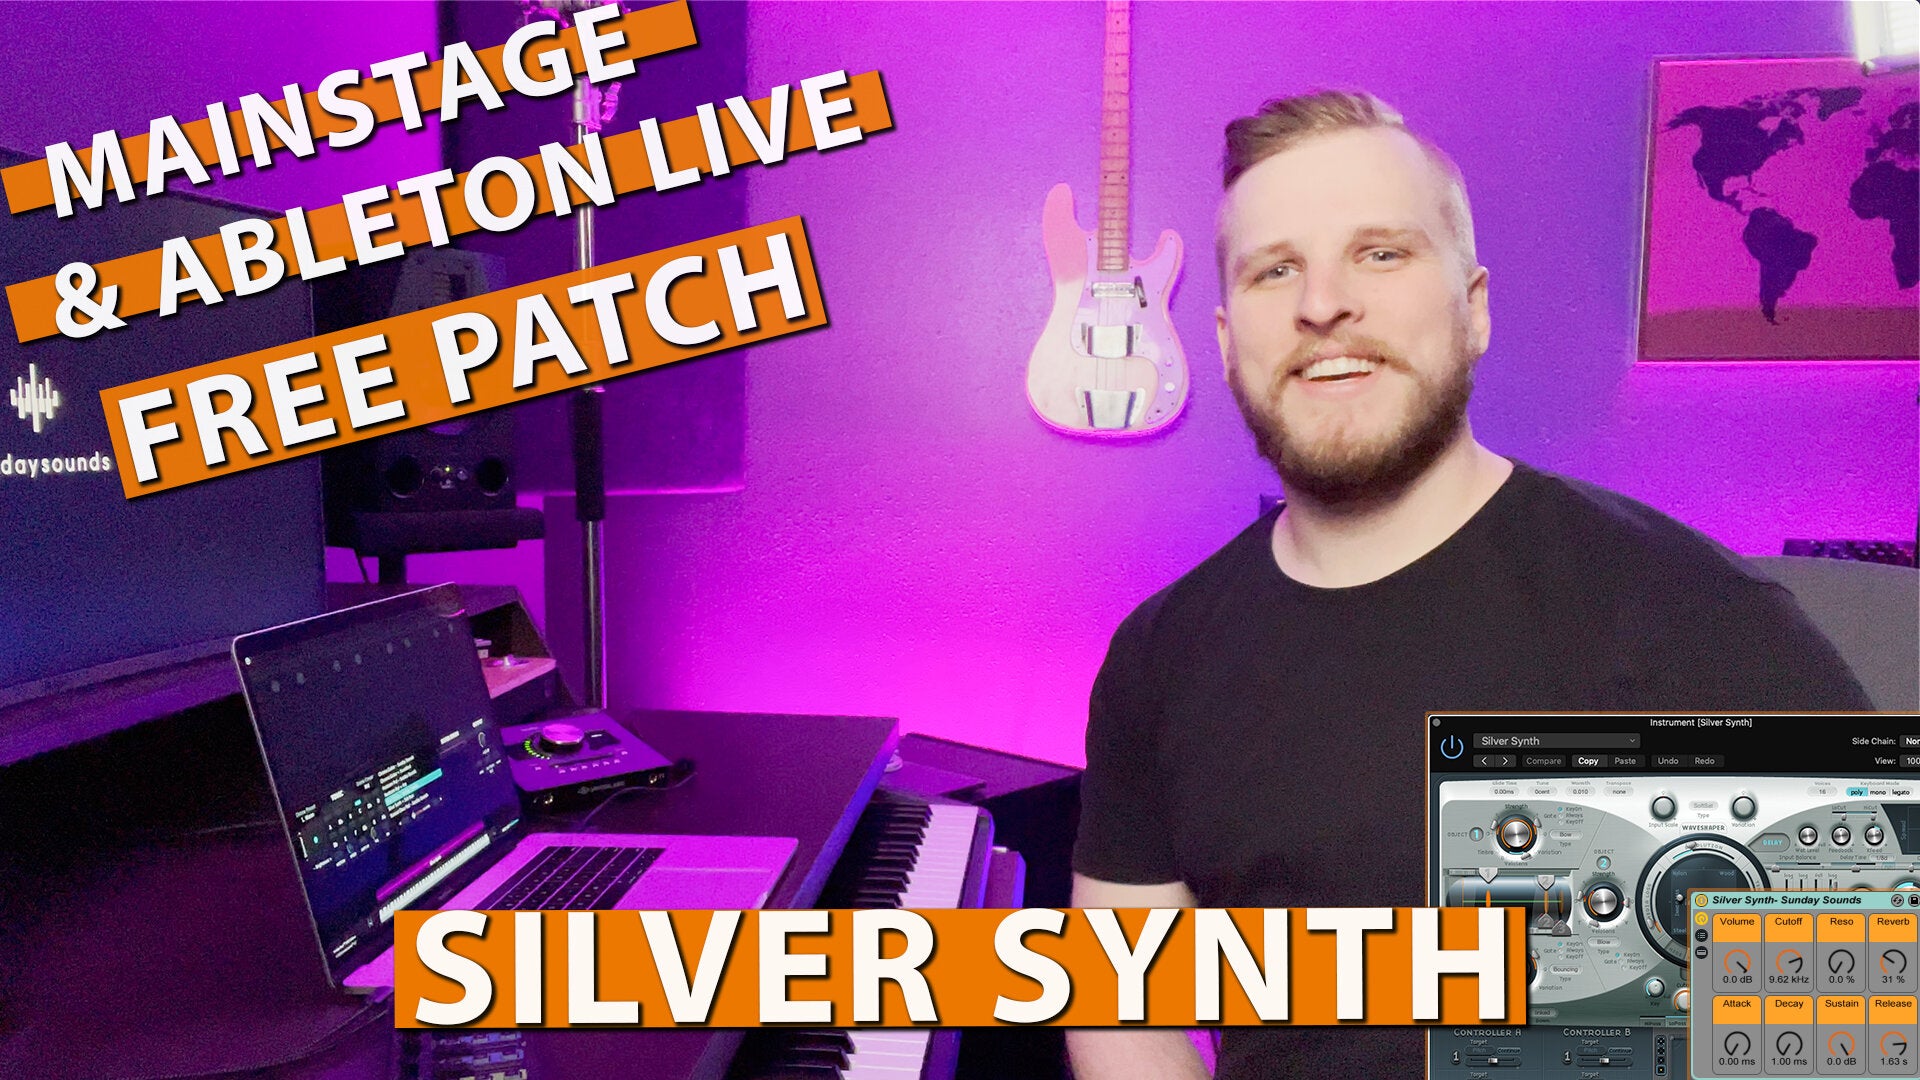 Free MainStage & Ableton Worship Patch! - Silver Synth